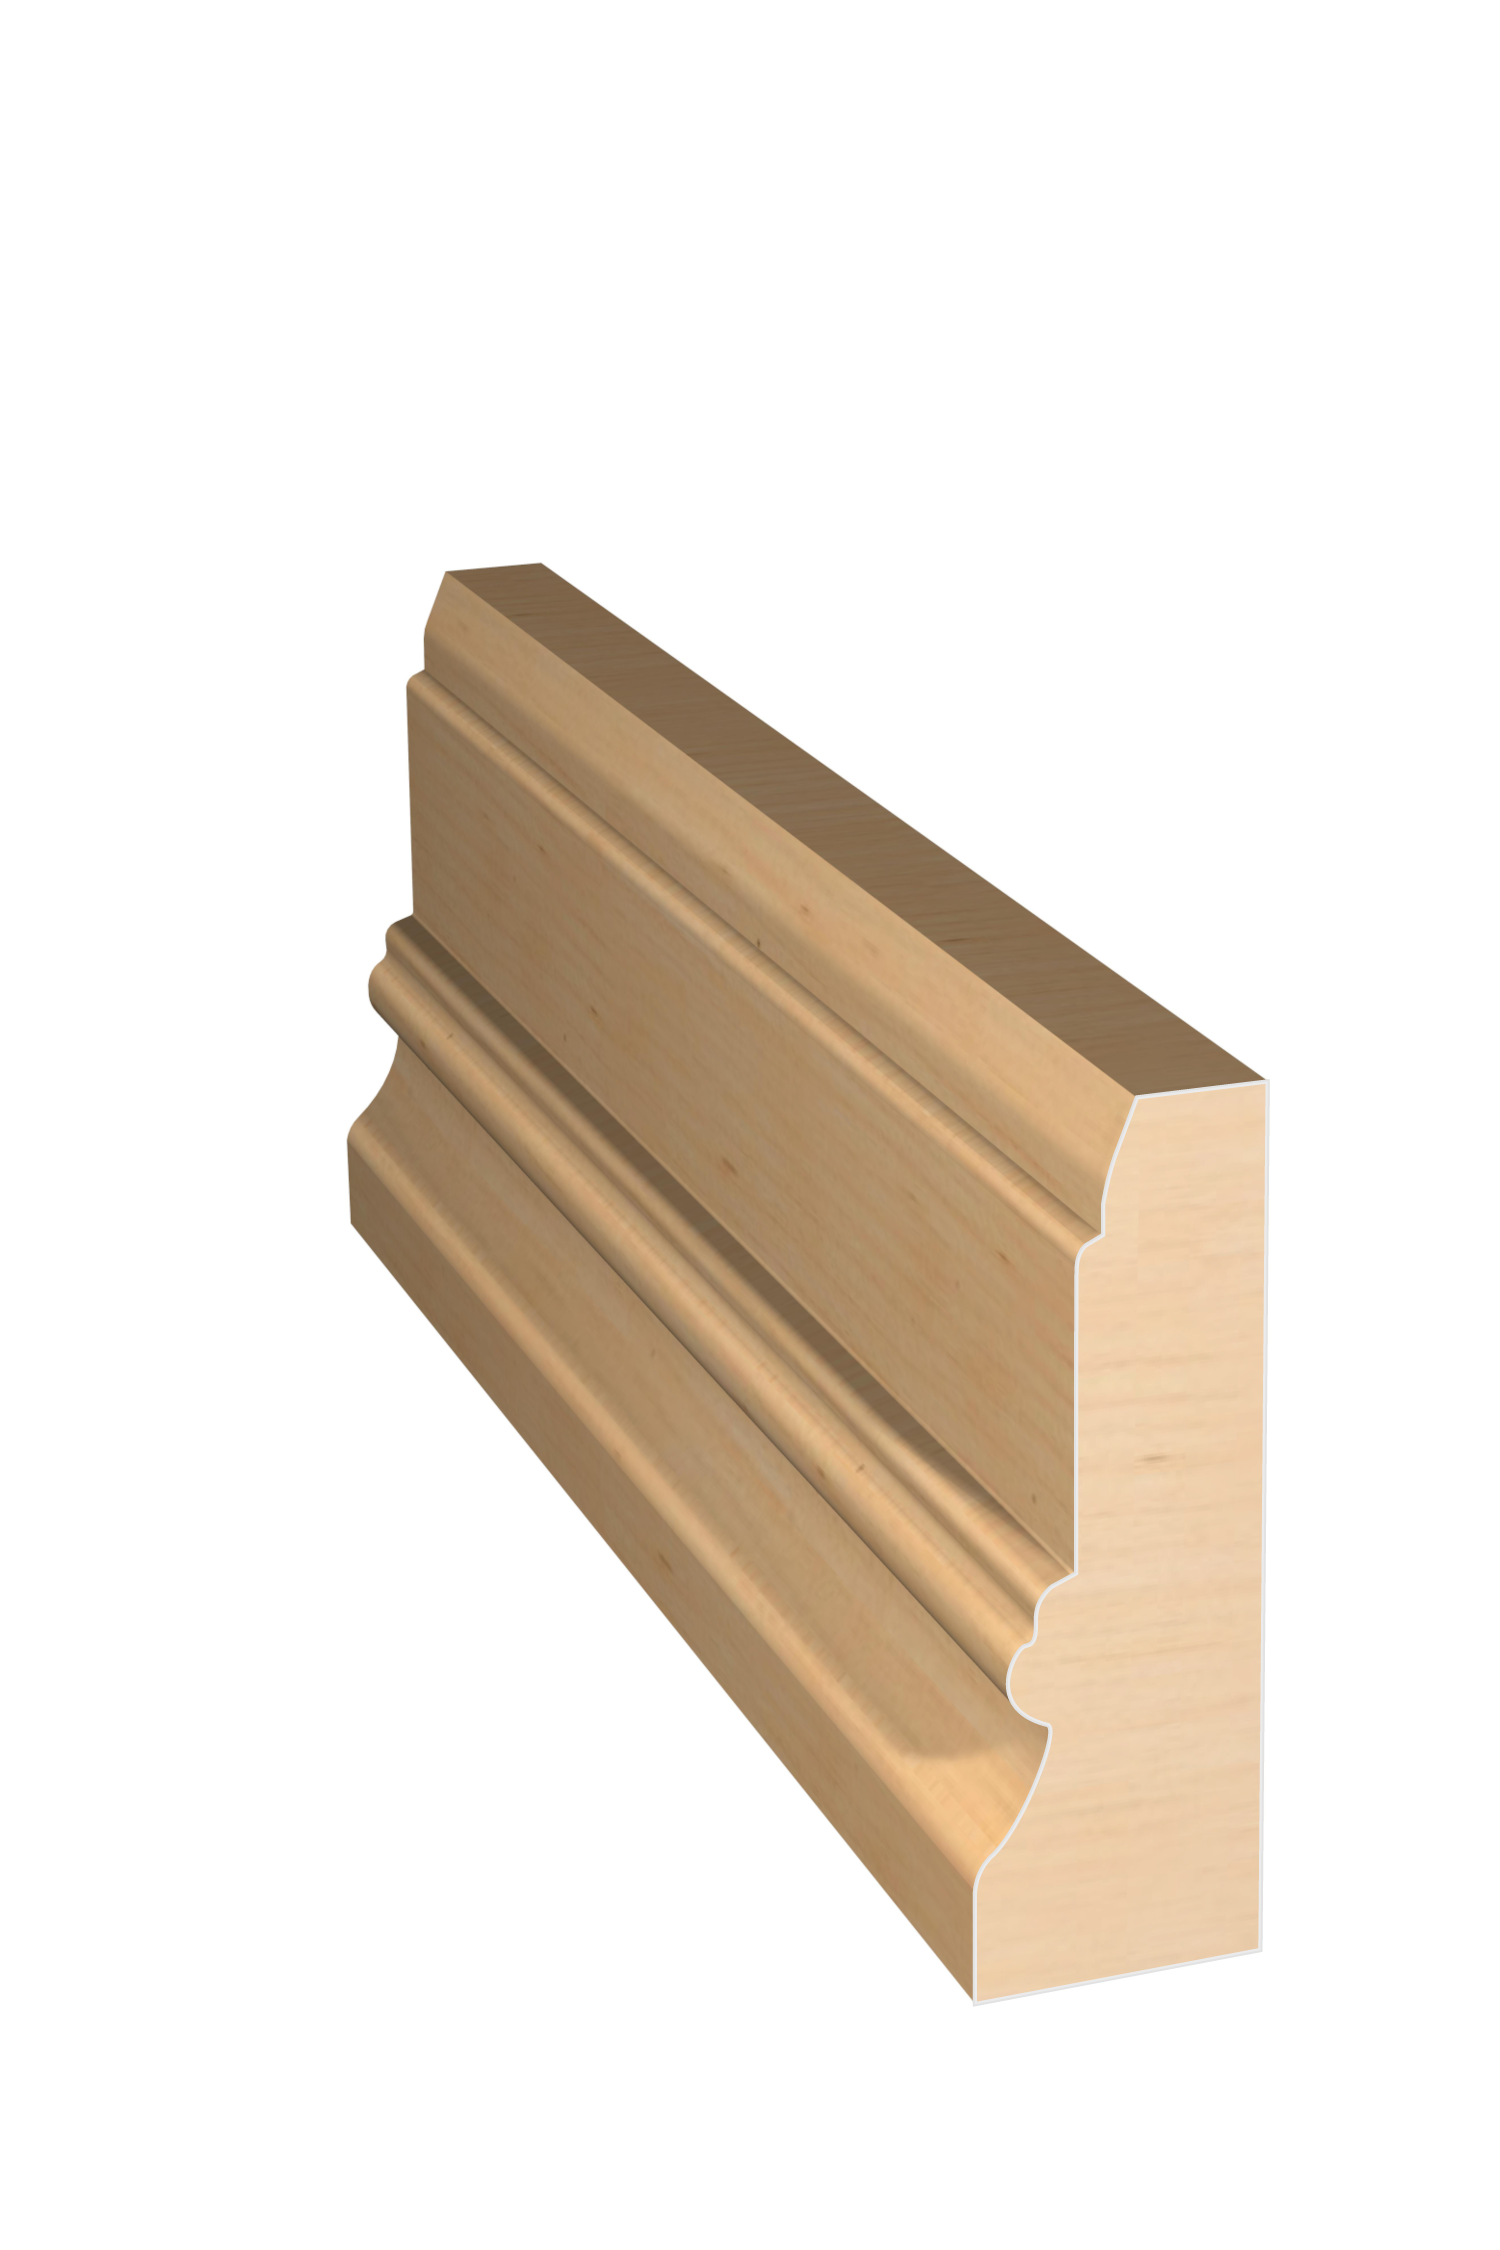 Three dimensional rendering of custom casing wood molding CAPL21425 made by Public Lumber Company in Detroit.